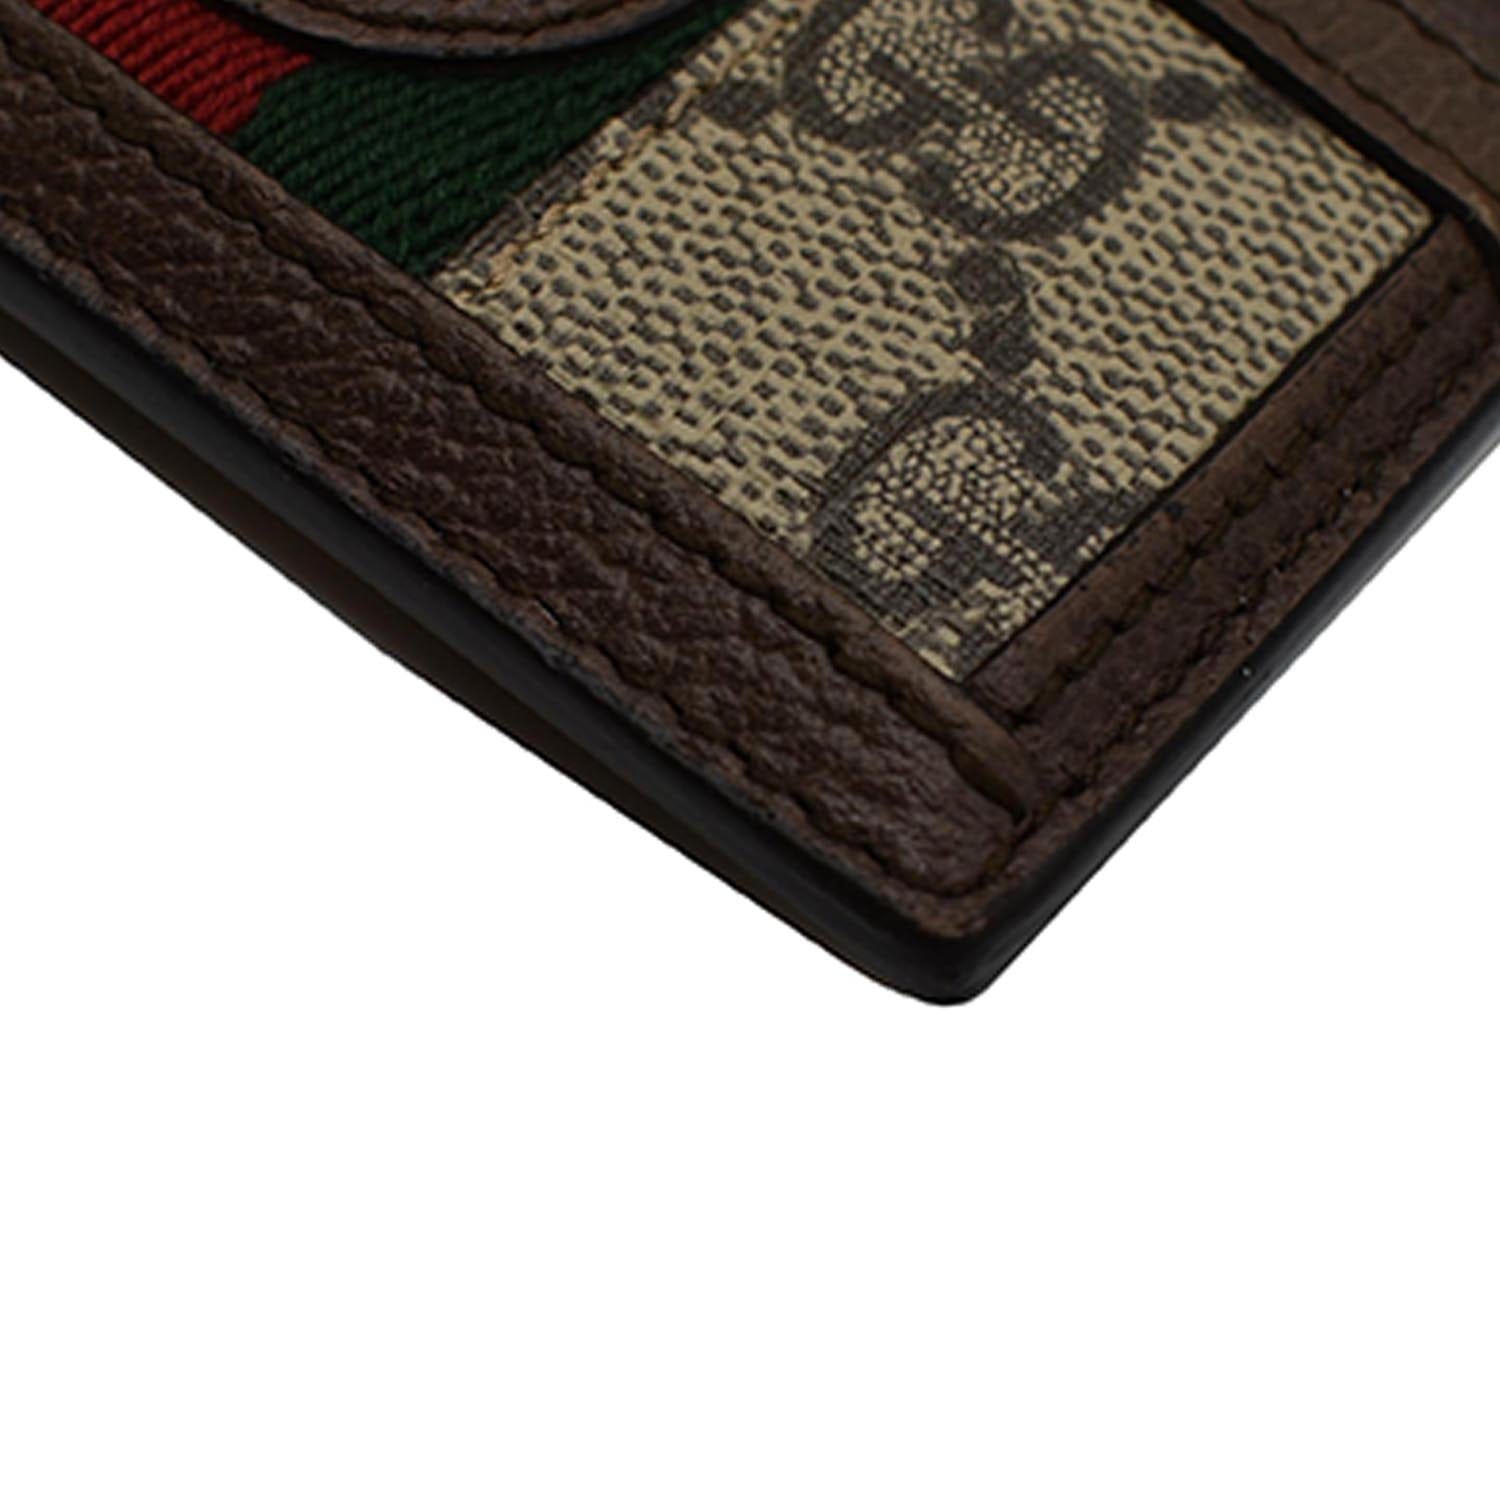 NEW] GUCCI 346079 Card Case Passport case fold over wallet brown